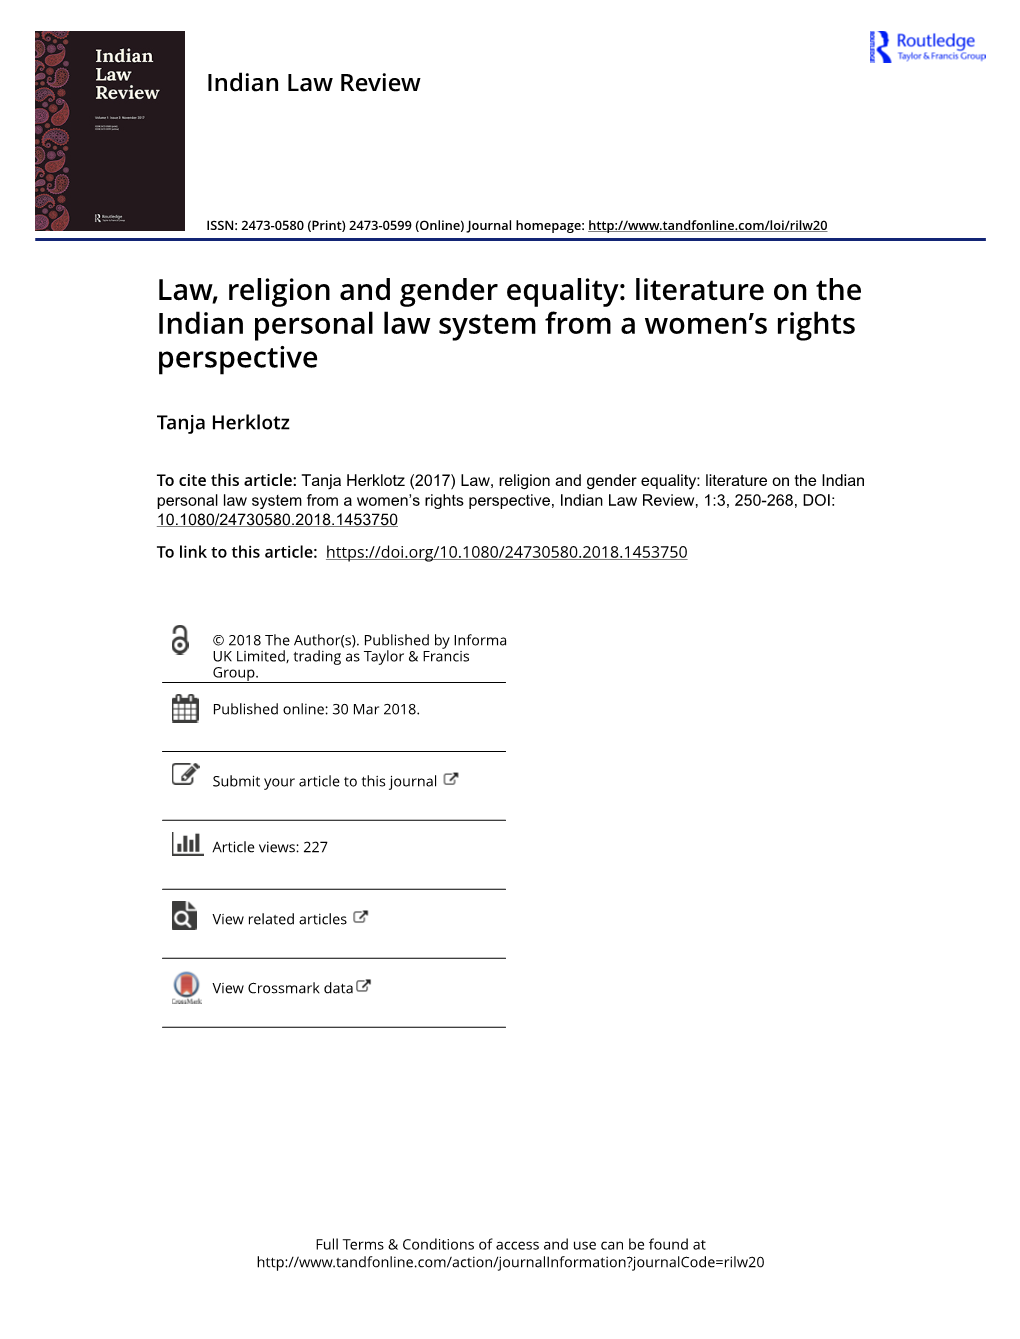 Literature on the Indian Personal Law System from a Women's Rights